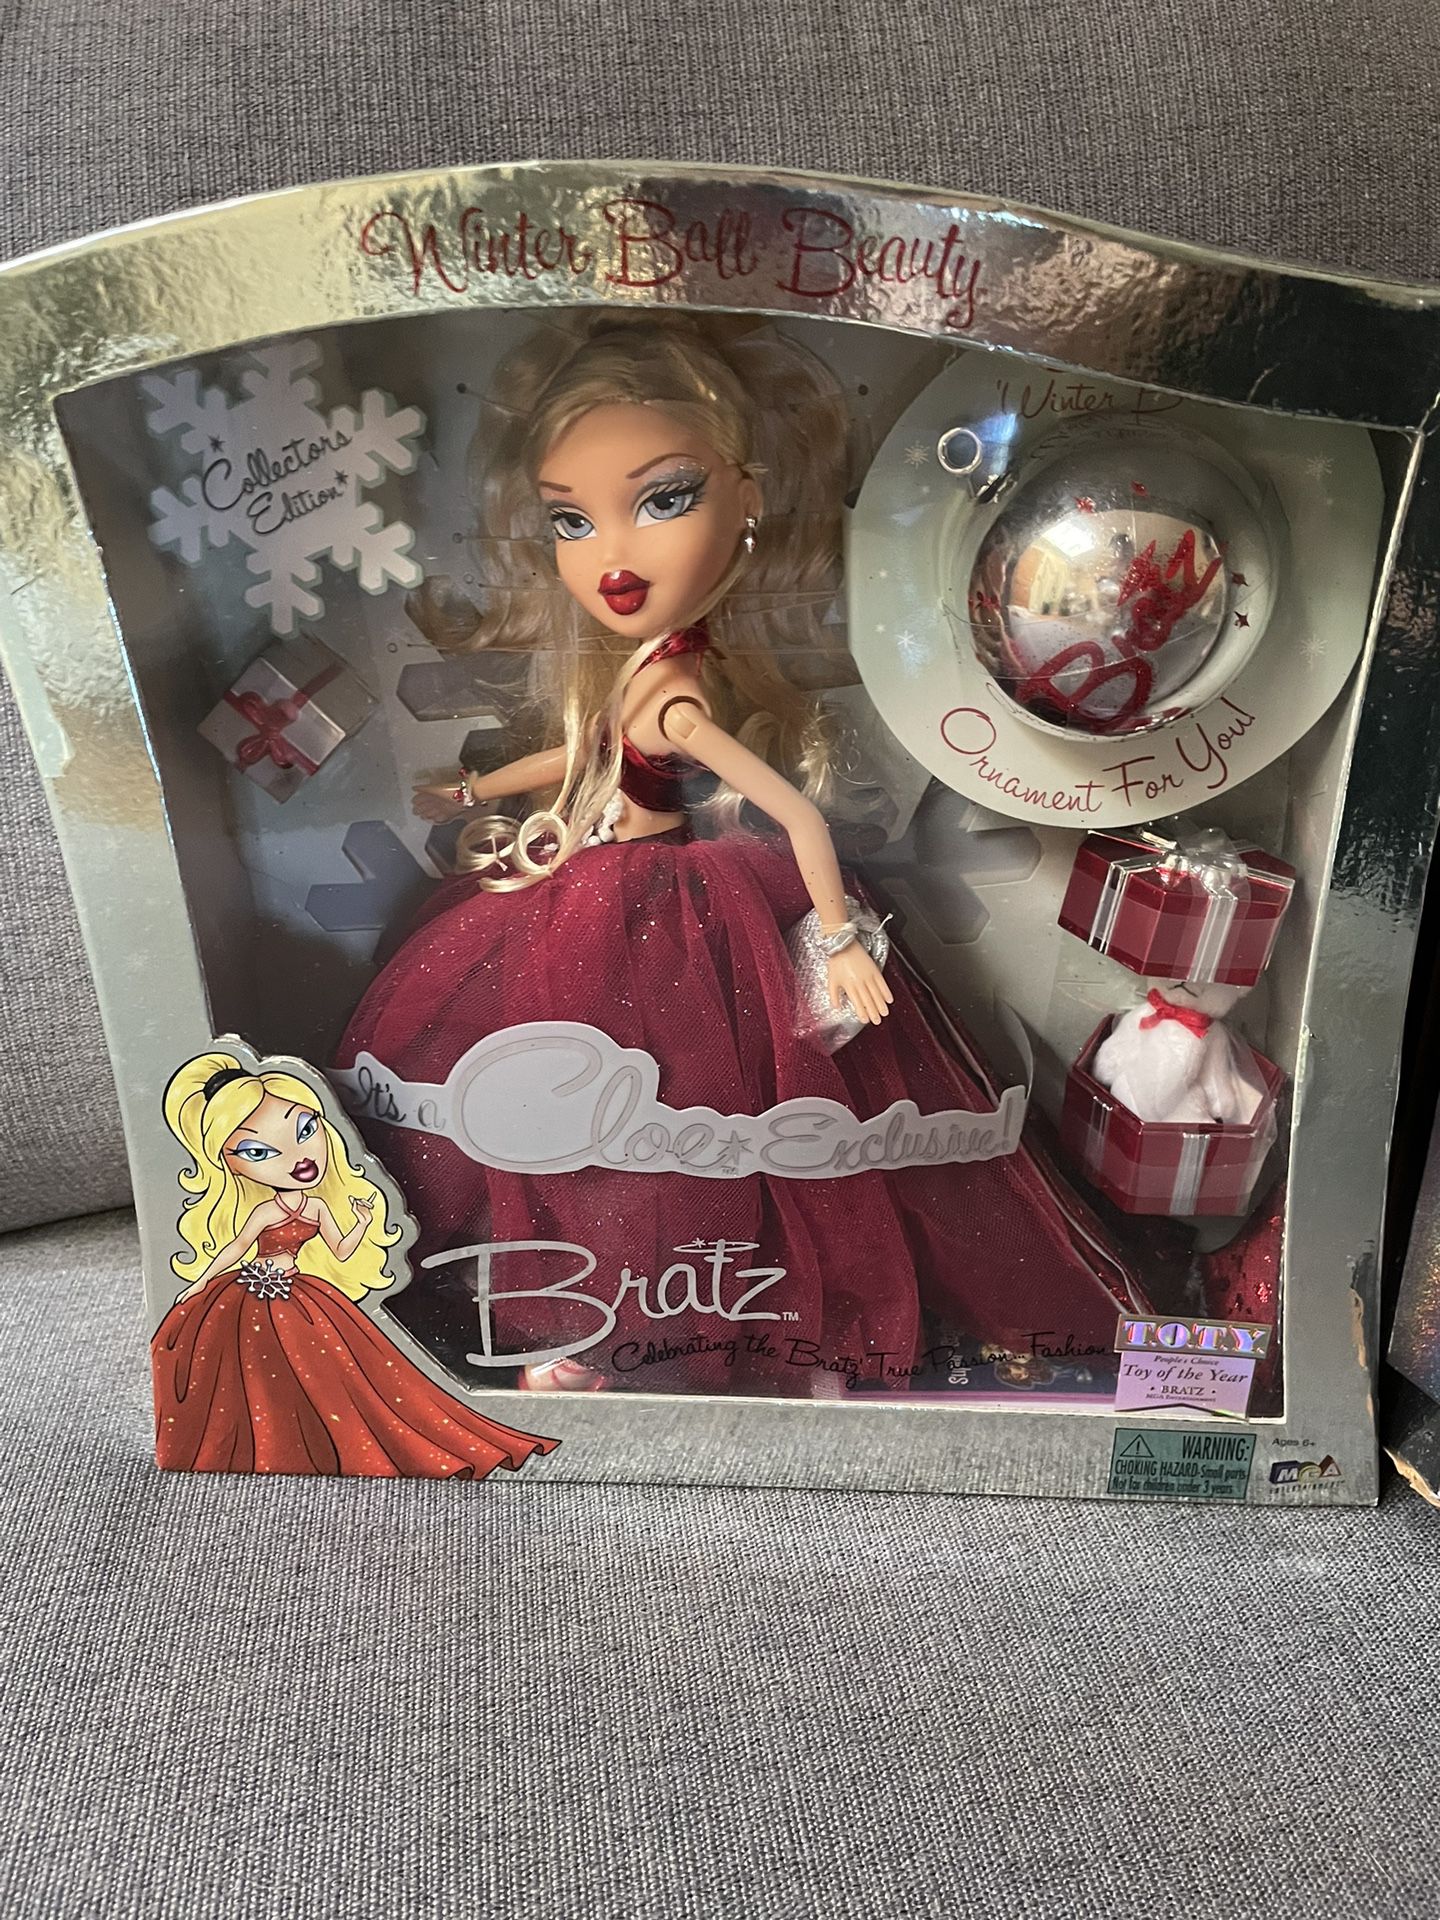 Special Limited Edition Barbies